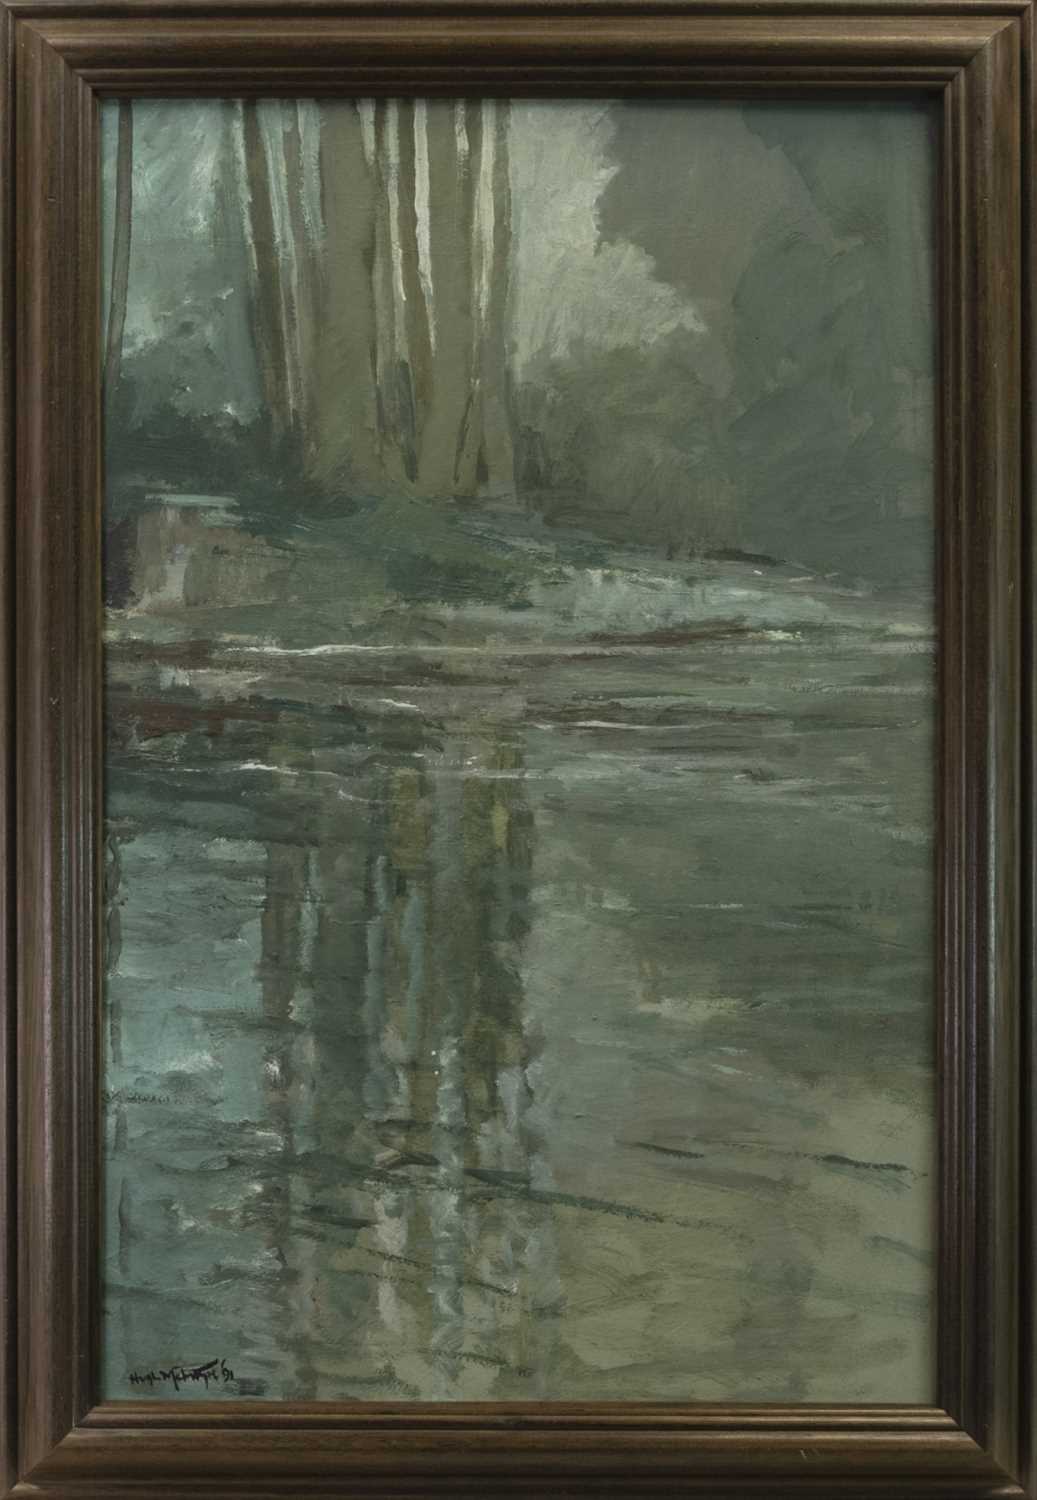 Lot 88 - WOODLAND REFLECTIONS, AN OIL BY HUGH MCINTYRE